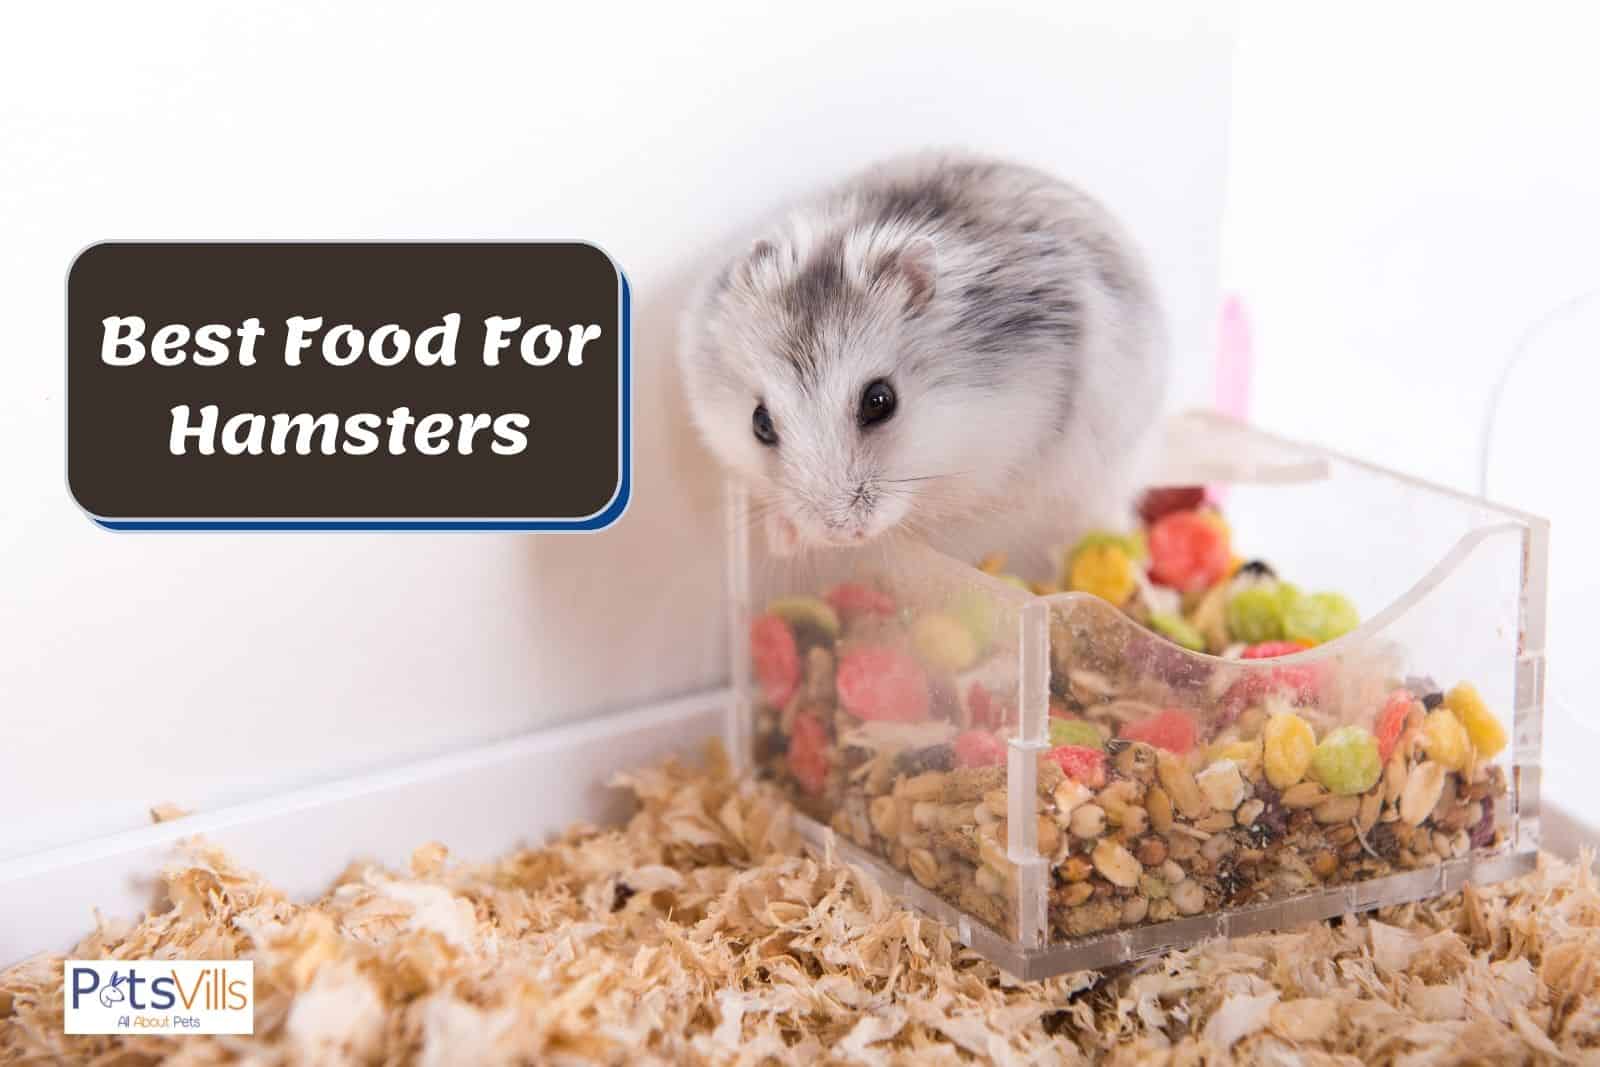 a hamster eating food